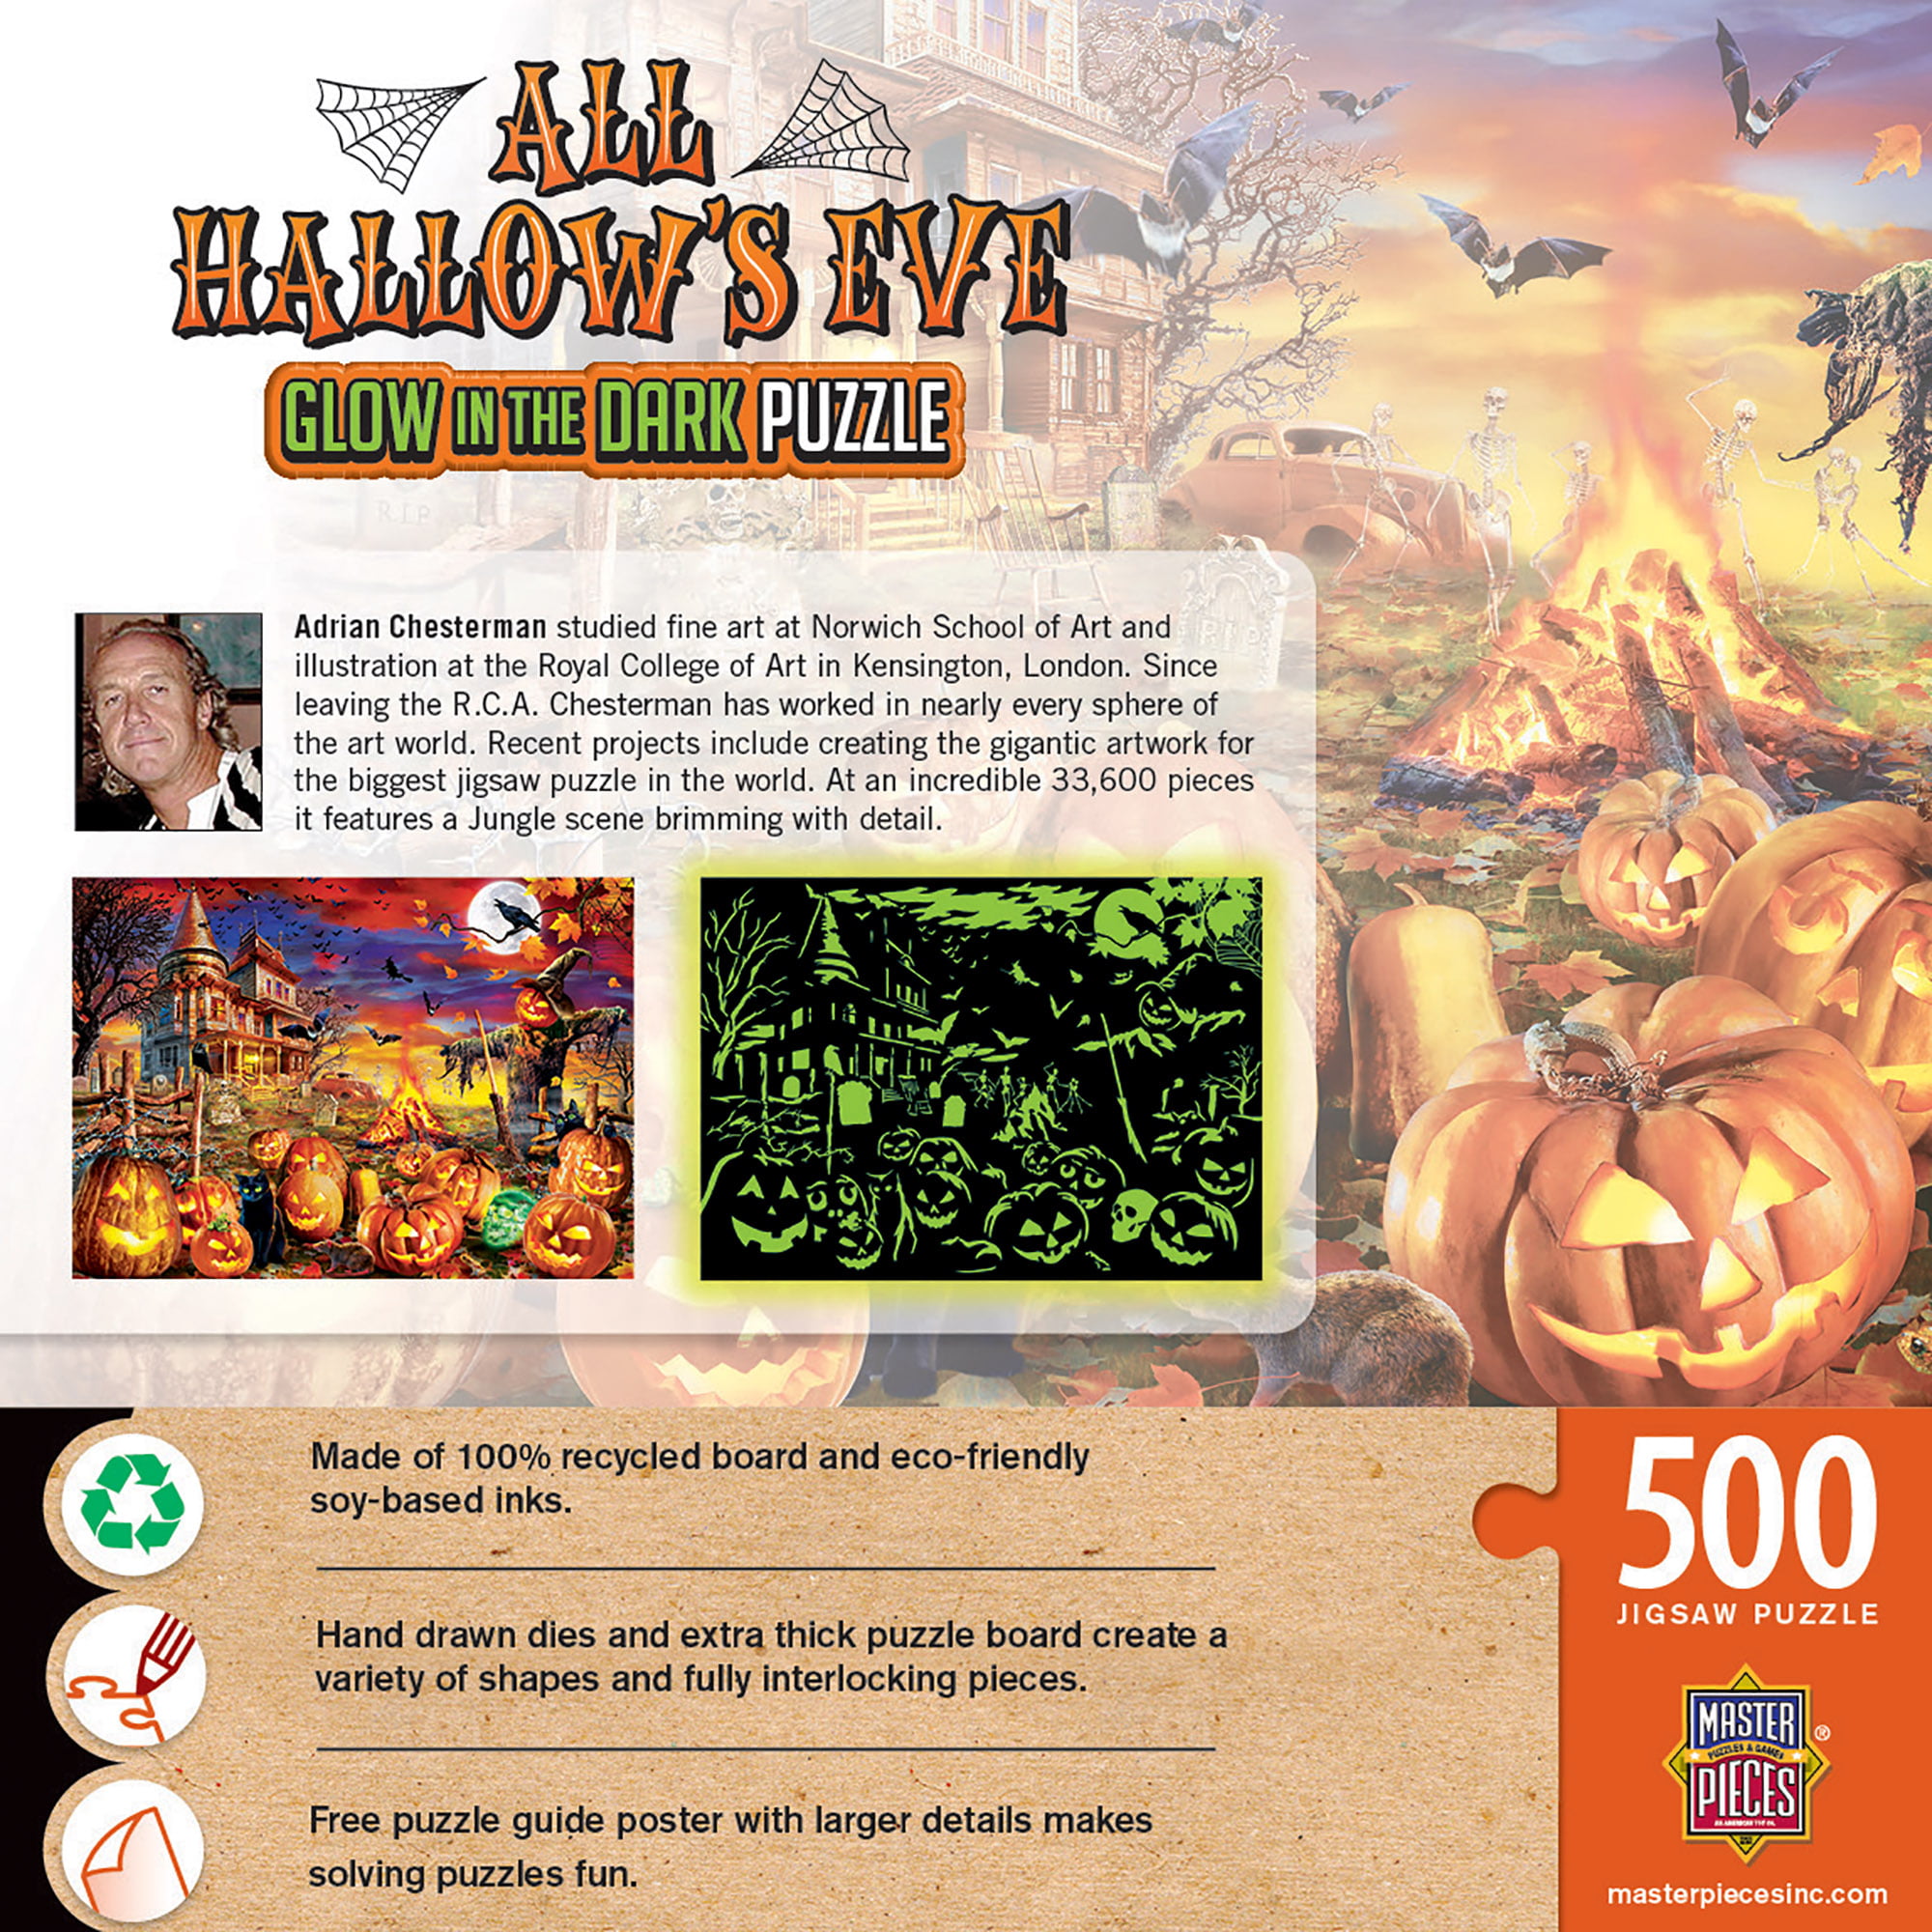 MasterPieces 500 PC Jigsaw Puzzle All Hallows Eve Glow in The Dark # 31991 for sale online 